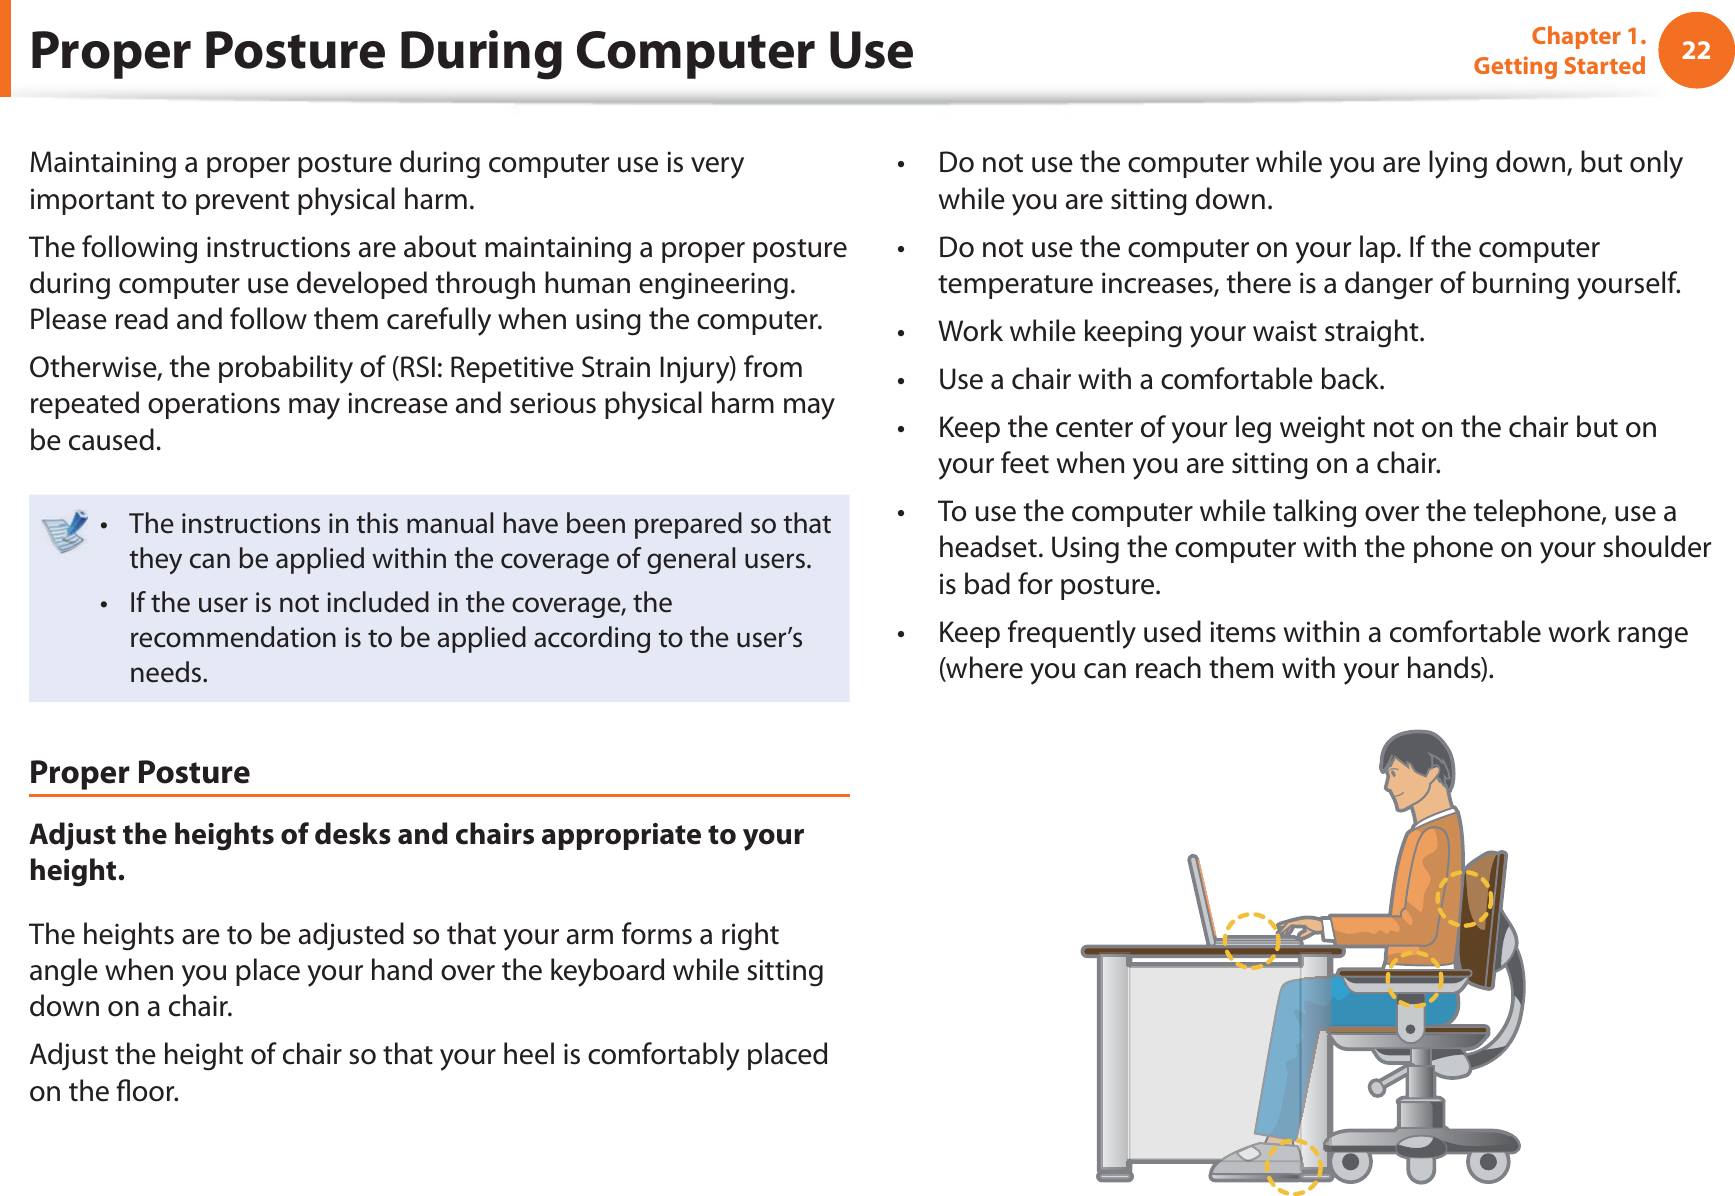 22Chapter 1. Getting StartedProper Posture During Computer UseMaintaining a proper posture during computer use is very important to prevent physical harm.The following instructions are about maintaining a proper posture during computer use developed through human engineering. Please read and follow them carefully when using the computer.Otherwise, the probability of (RSI: Repetitive Strain Injury) from repeated operations may increase and serious physical harm may be caused.The instructions in this manual have been prepared so that t they can be applied within the coverage of general users. If the user is not included in the coverage, the t recommendation is to be applied according to the user’s needs.Proper PostureAdjust the heights of desks and chairs appropriate to your height.The heights are to be adjusted so that your arm forms a right angle when you place your hand over the keyboard while sitting down on a chair.Adjust the height of chair so that your heel is comfortably placed on the ﬂ oor.Do not use the computer while you are lying down, but only t while you are sitting down.Do not use the computer on your lap. If the computer t temperature increases, there is a danger of burning yourself.Work while keeping your waist straight.t Use a chair with a comfortable back.t Keep the center of your leg weight not on the chair but on t your feet when you are sitting on a chair.To use the computer while talking over the telephone, use a t headset. Using the computer with the phone on your shoulder is bad for posture.Keep frequently used items within a comfortable work range t (where you can reach them with your hands).